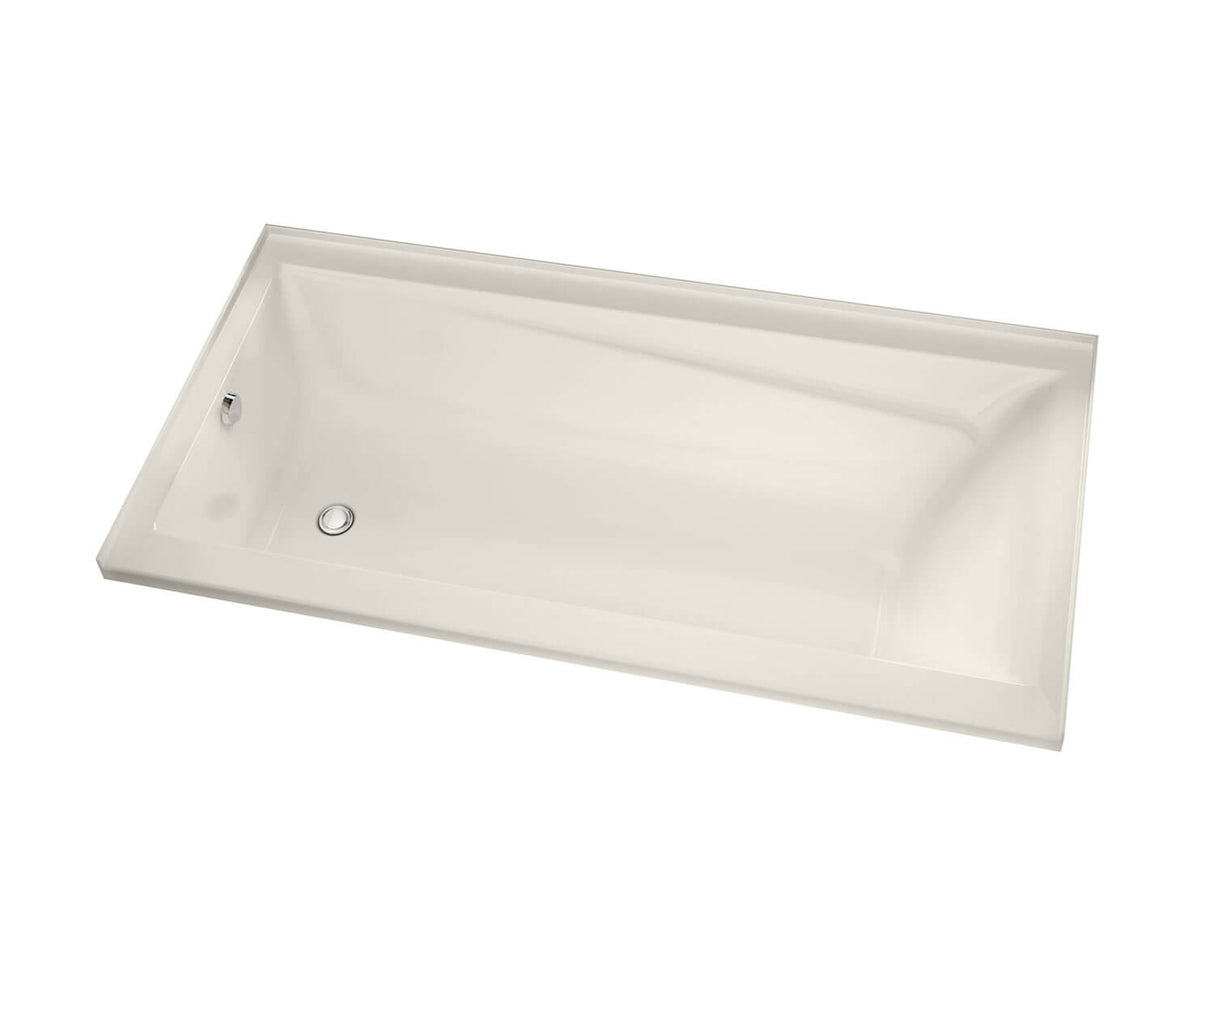 MAAX 106220-L-097-007 Exhibit 6632 IF Acrylic Alcove Left-Hand Drain Combined Whirlpool & Aeroeffect Bathtub in Biscuit